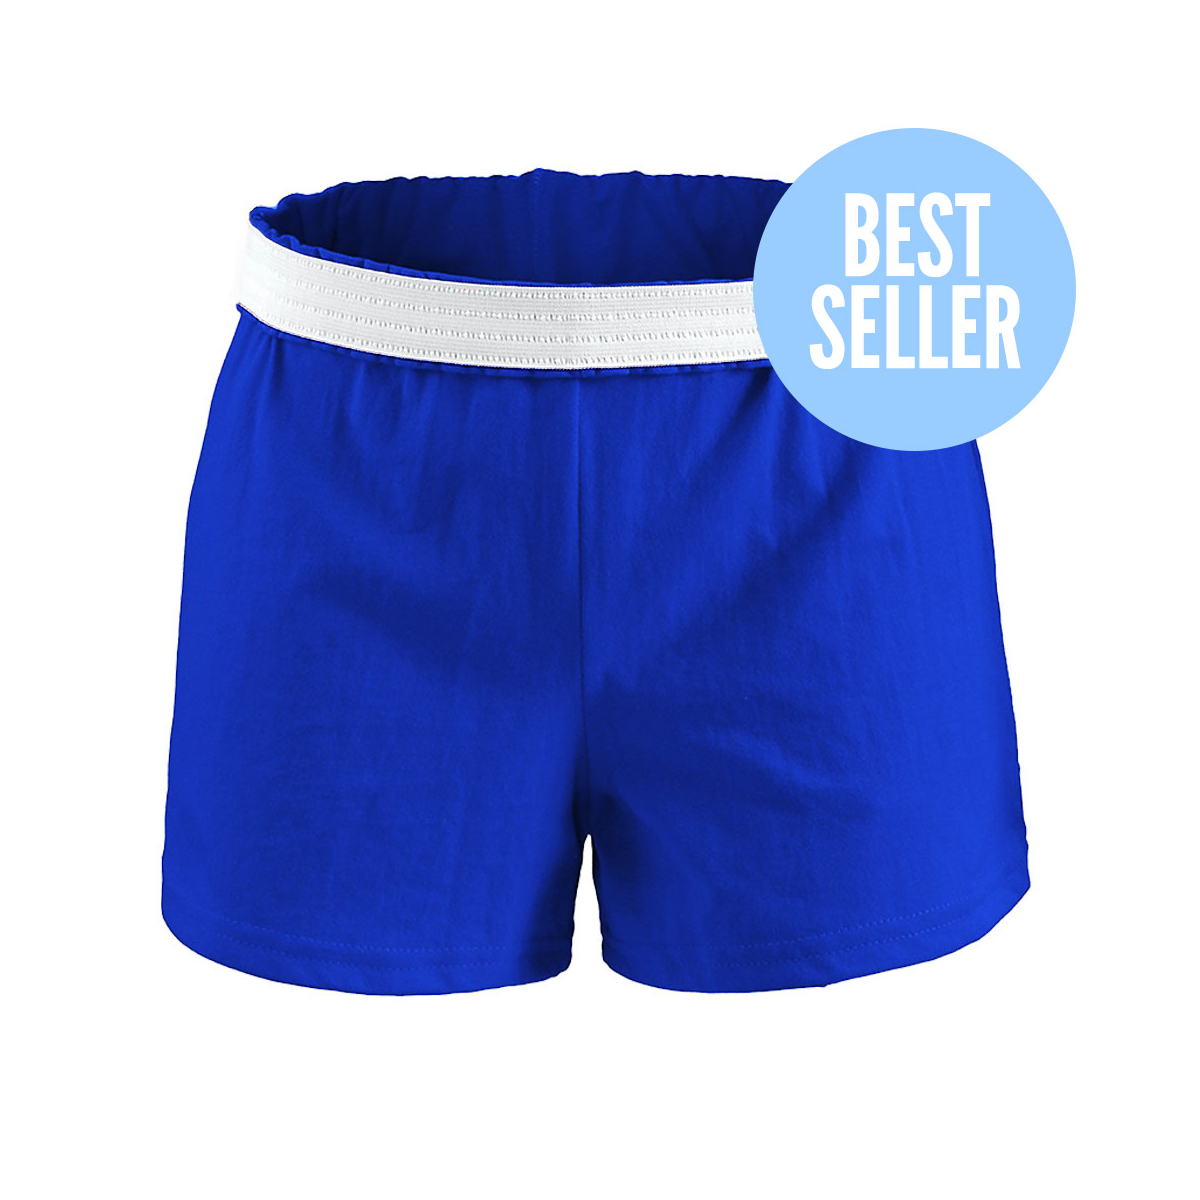 Soffe Girls Authentic Cheer Shorts